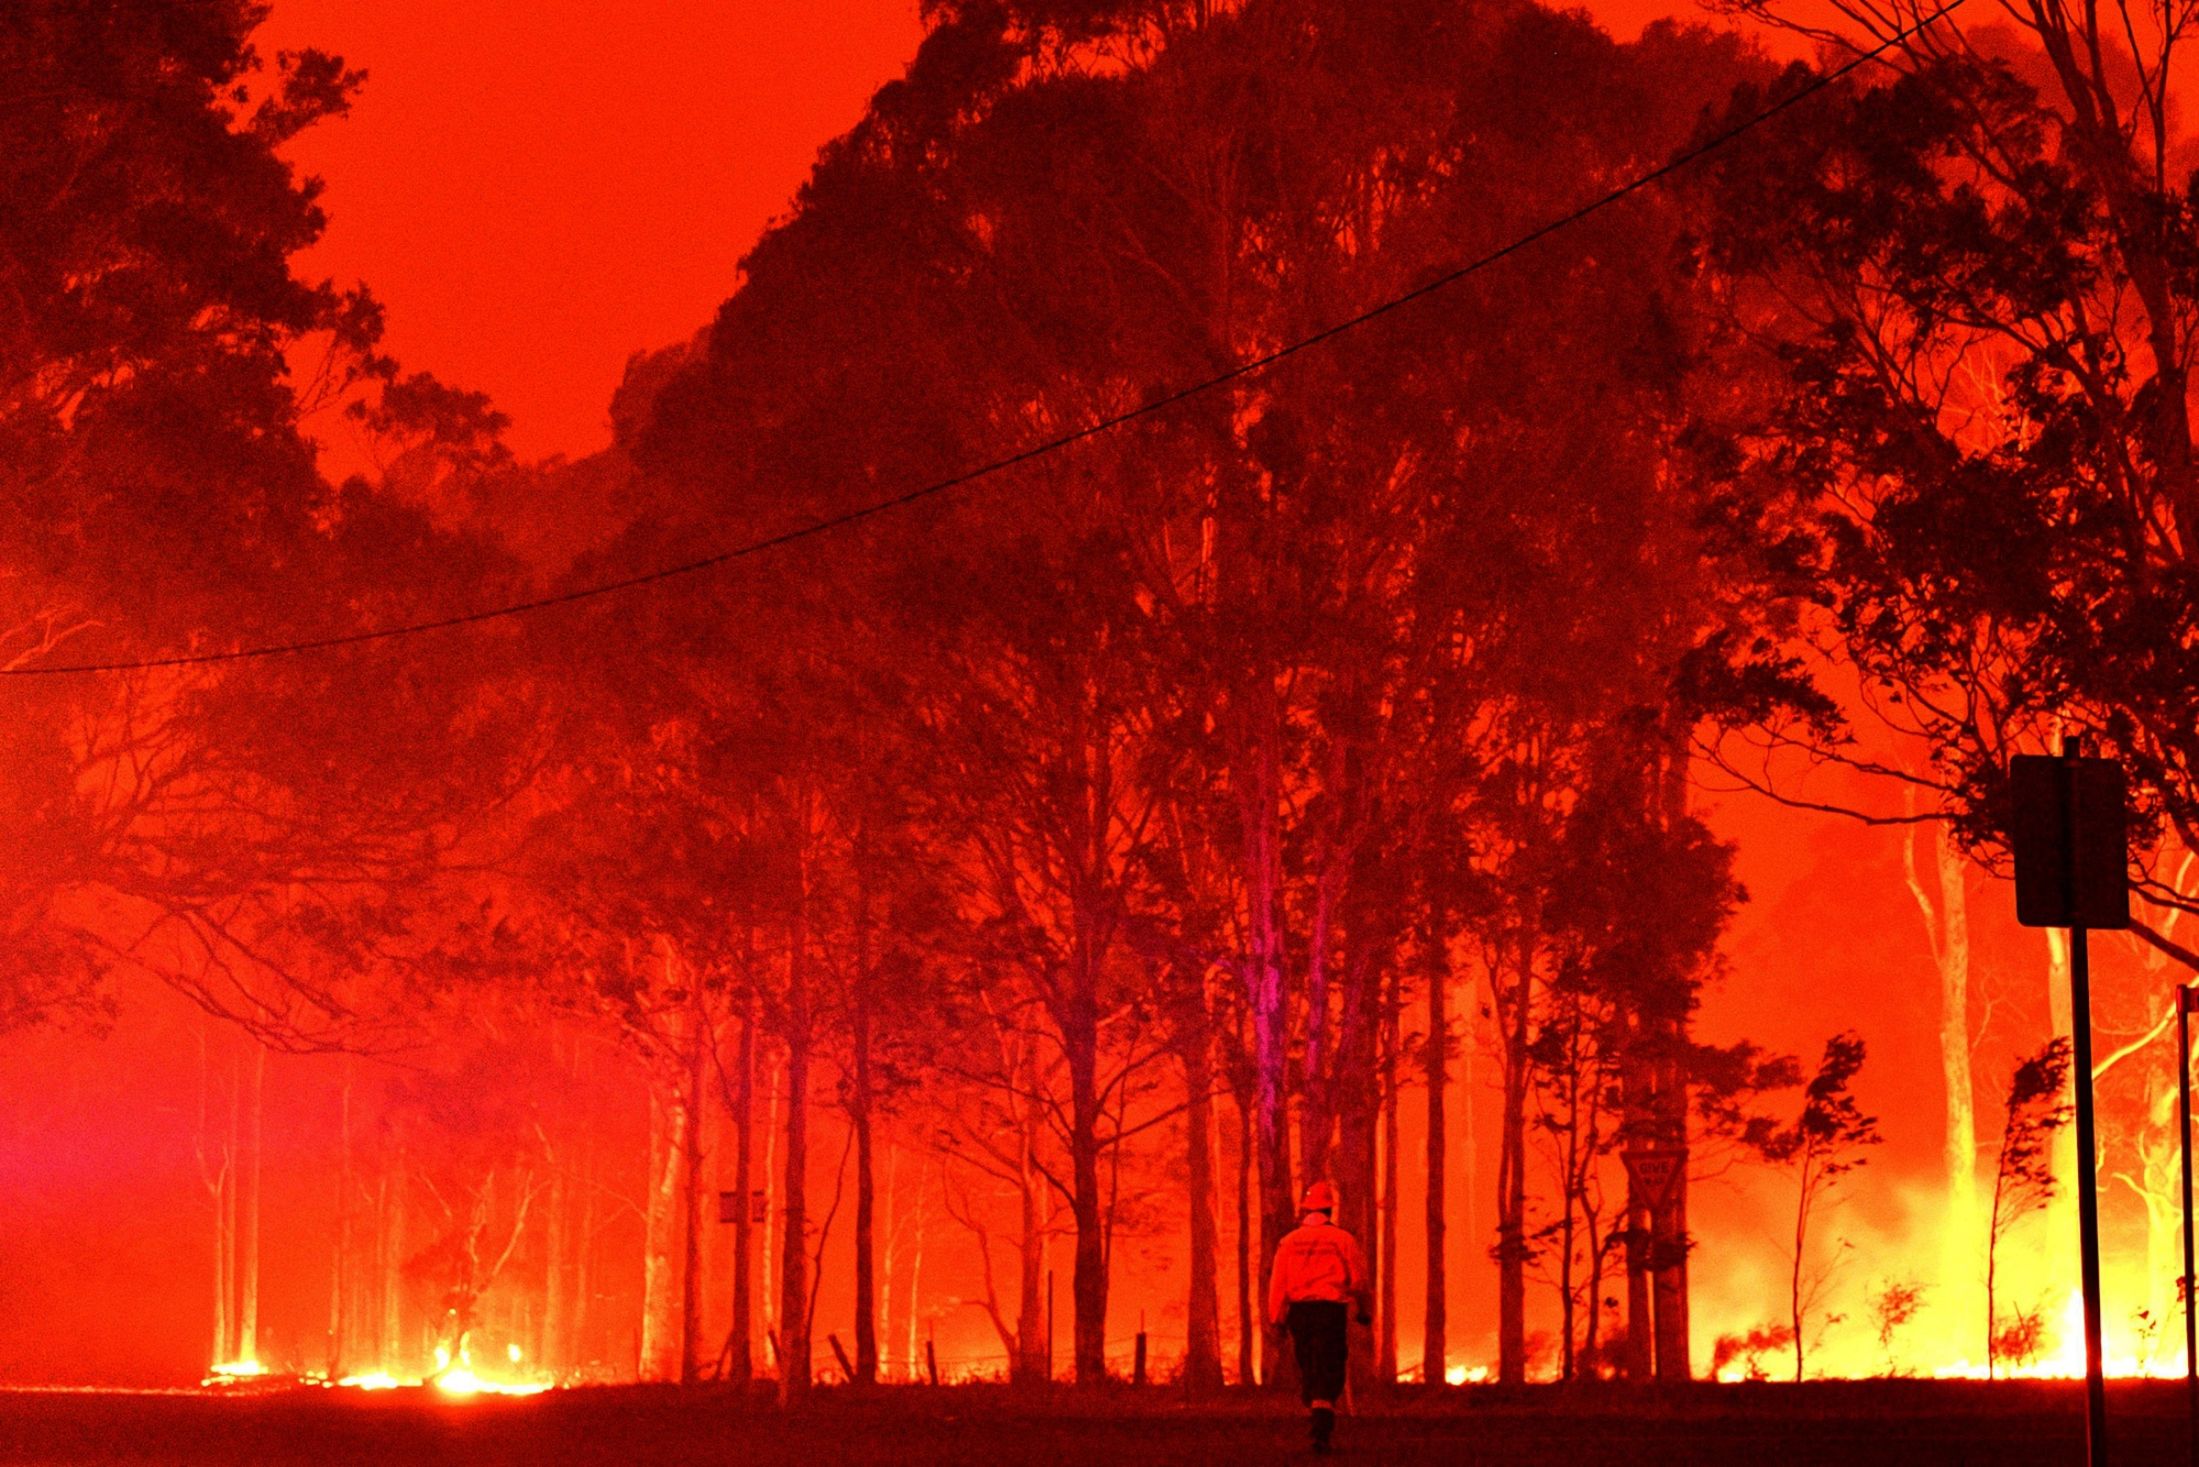 Summer S Bushfires Released More Carbon Dioxide Than Australia Does In A Year Bushfires The Guardian